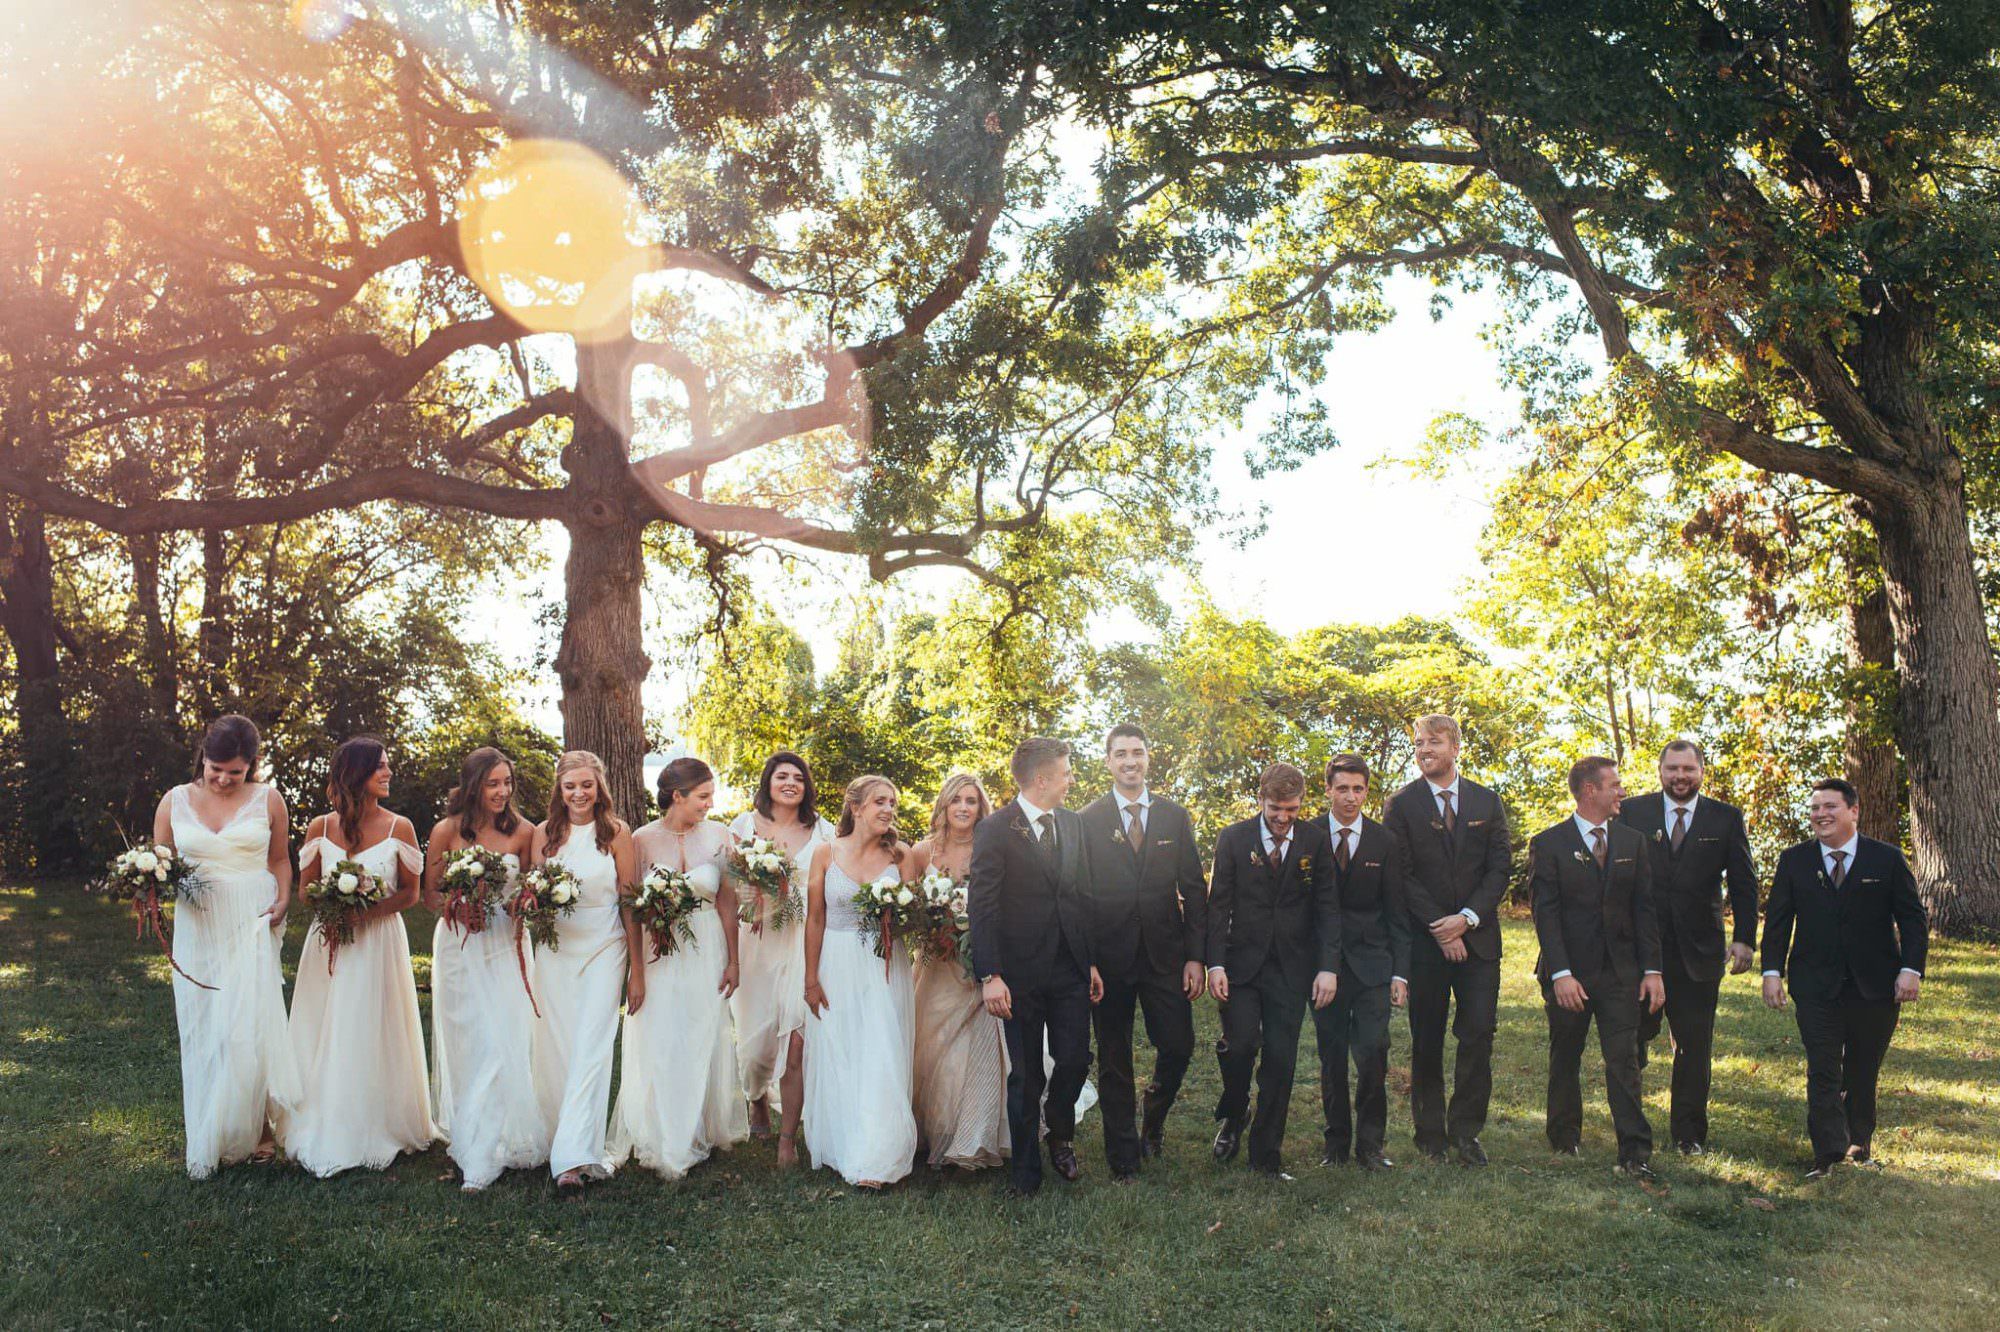 Put-in-Bay wedding party photo